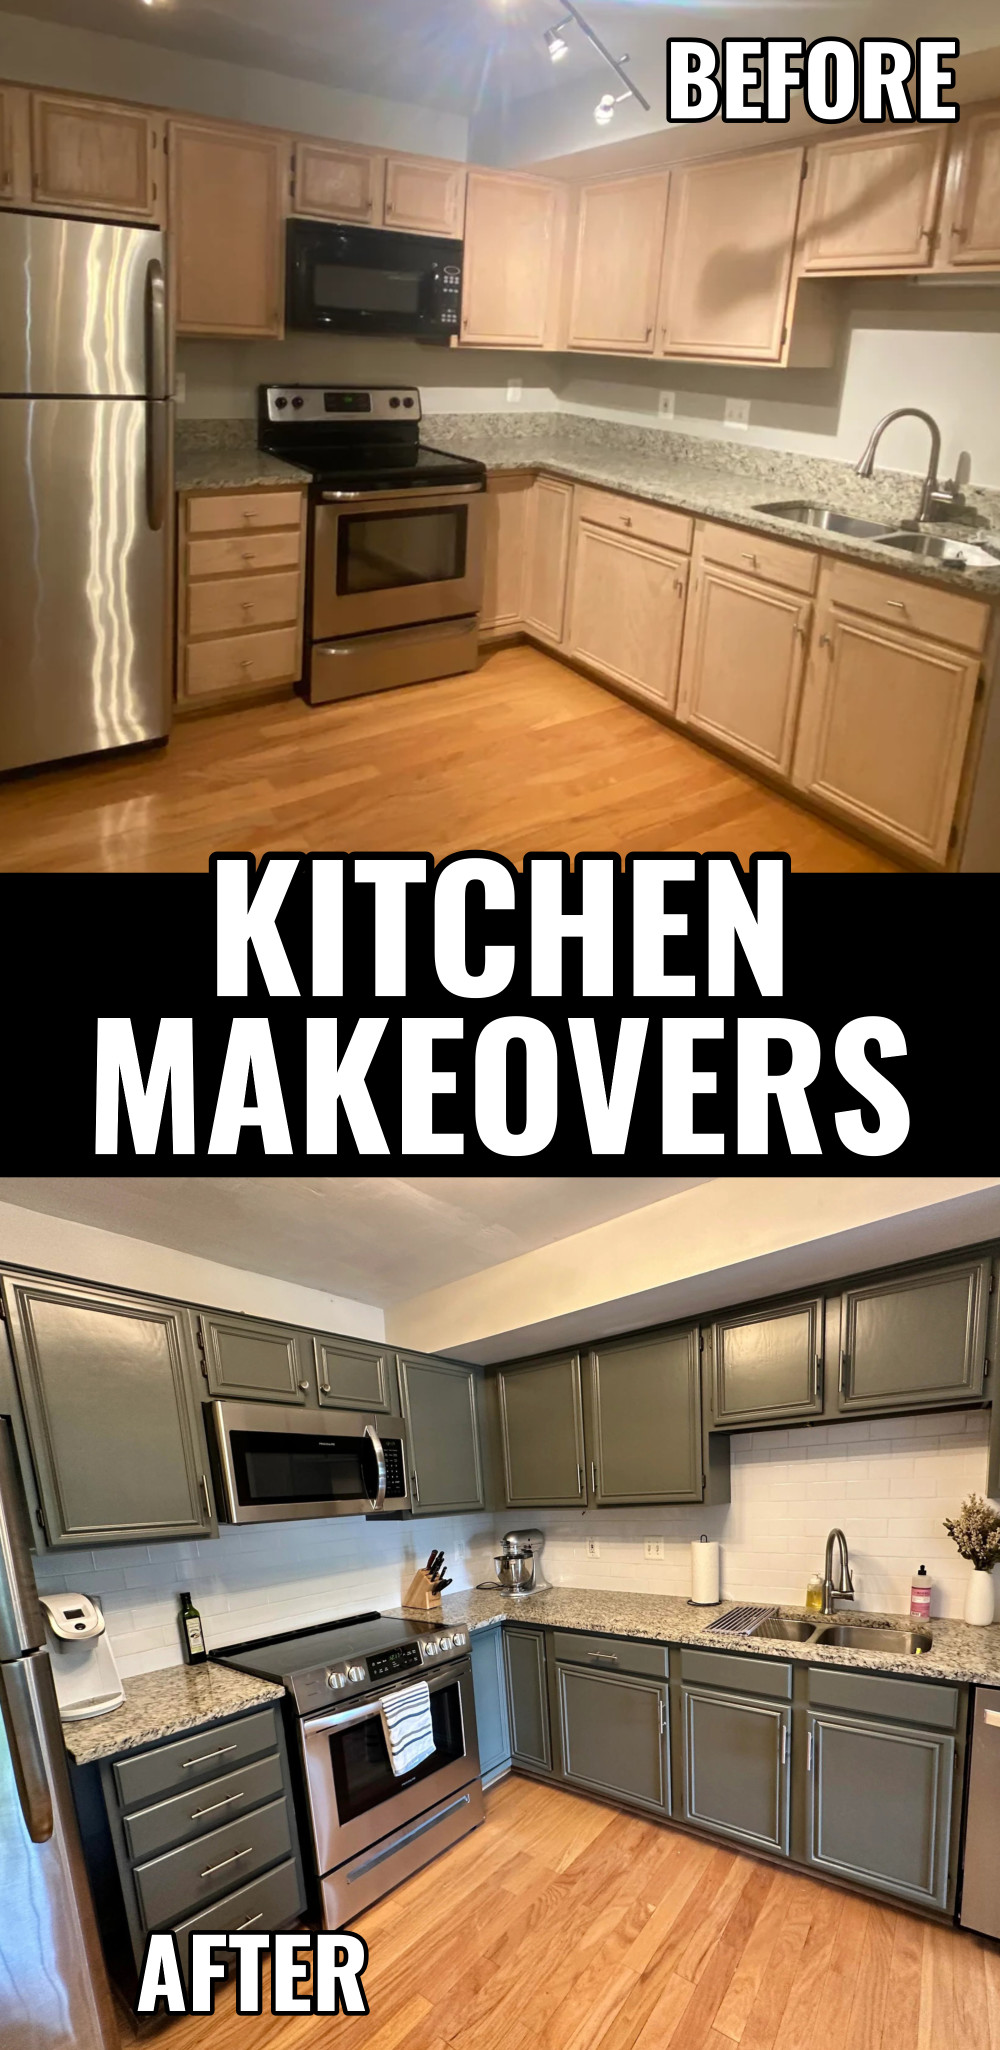 Kitchen Makeovers Before and After